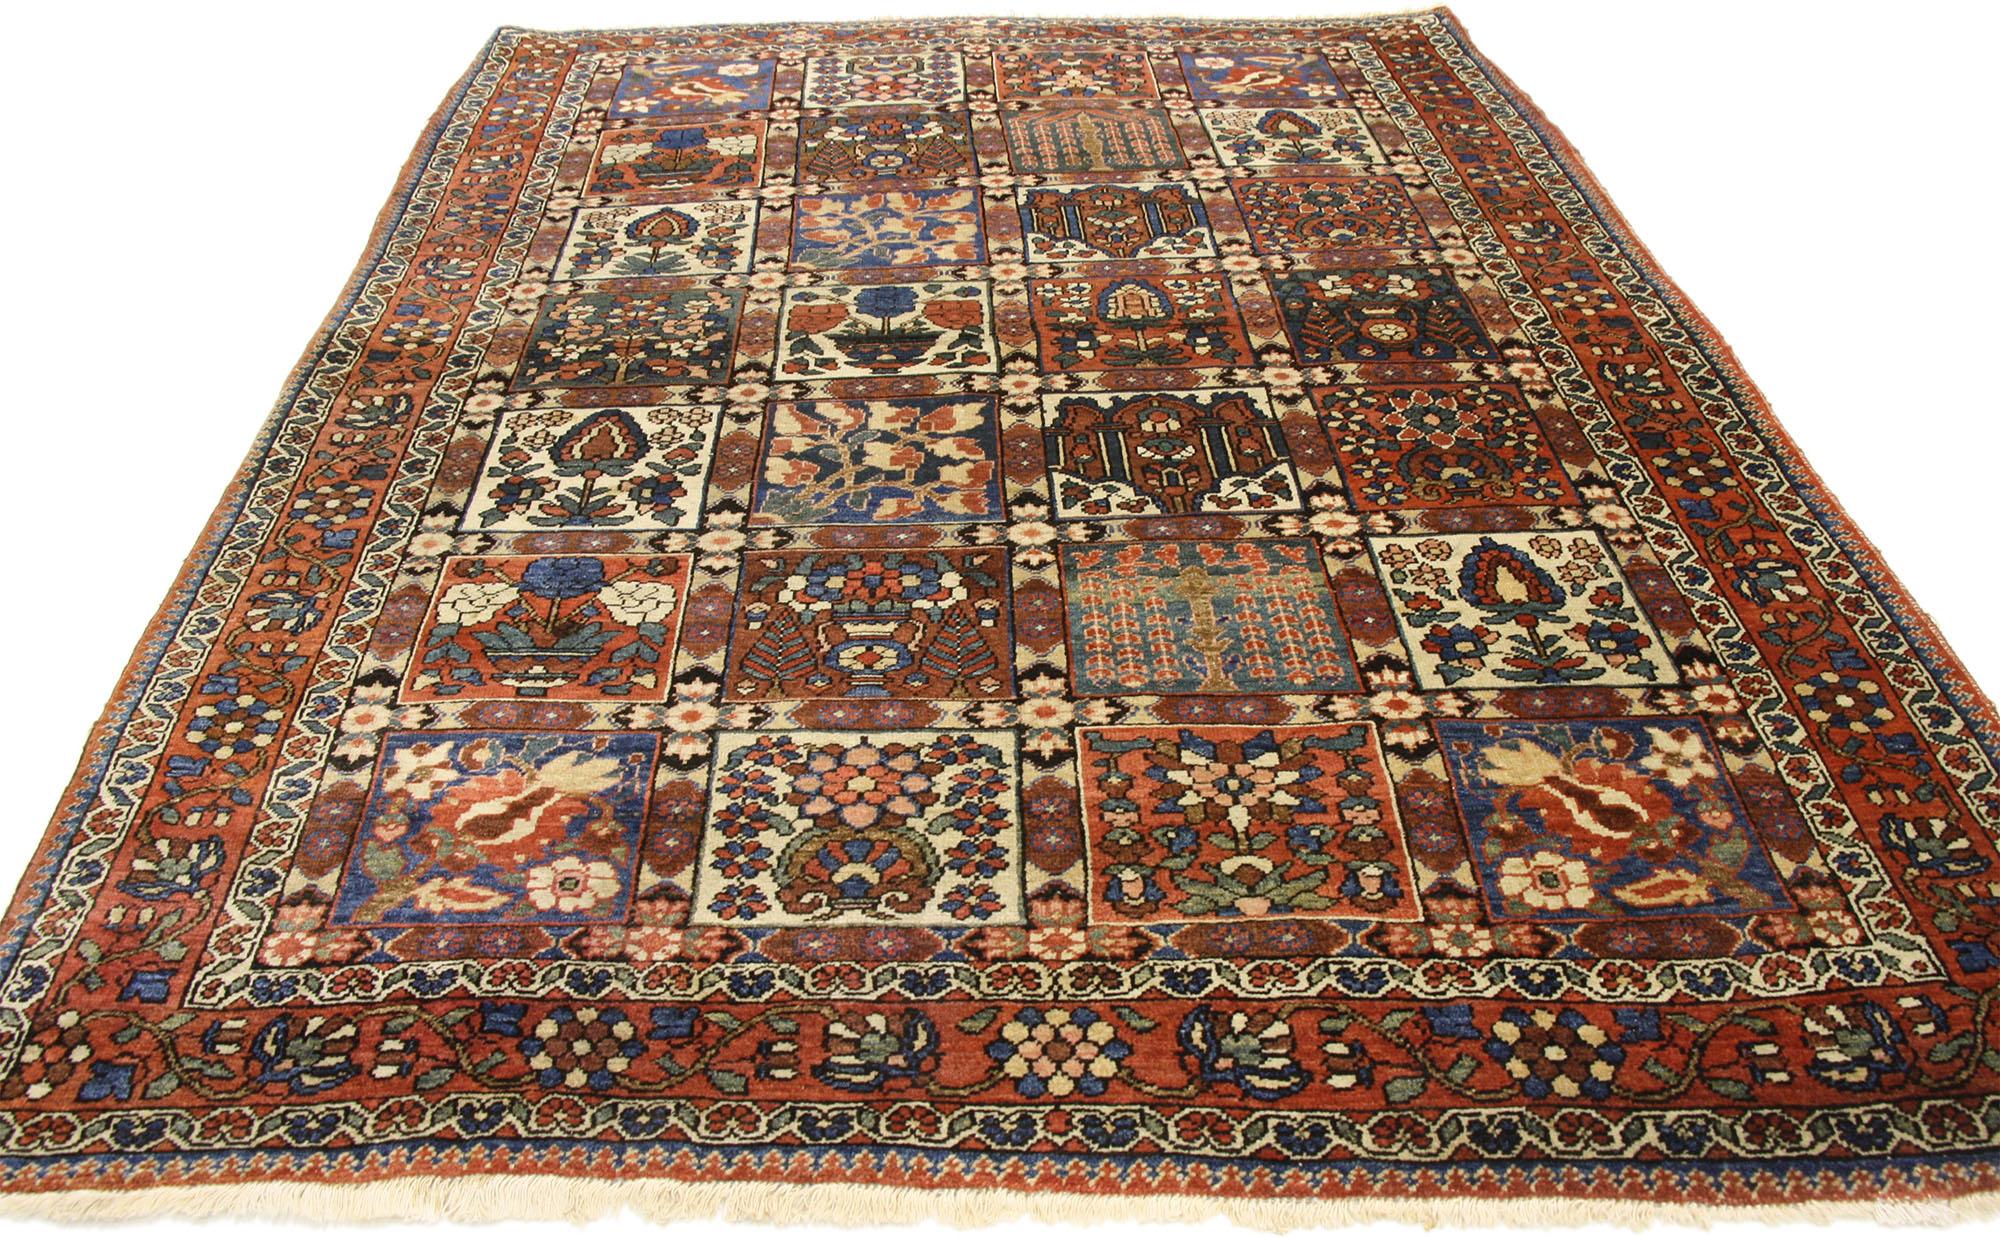 Hand-Knotted Rustic Style Antique Persian Bakhtiari Rug with Four Seasons Garden Design For Sale